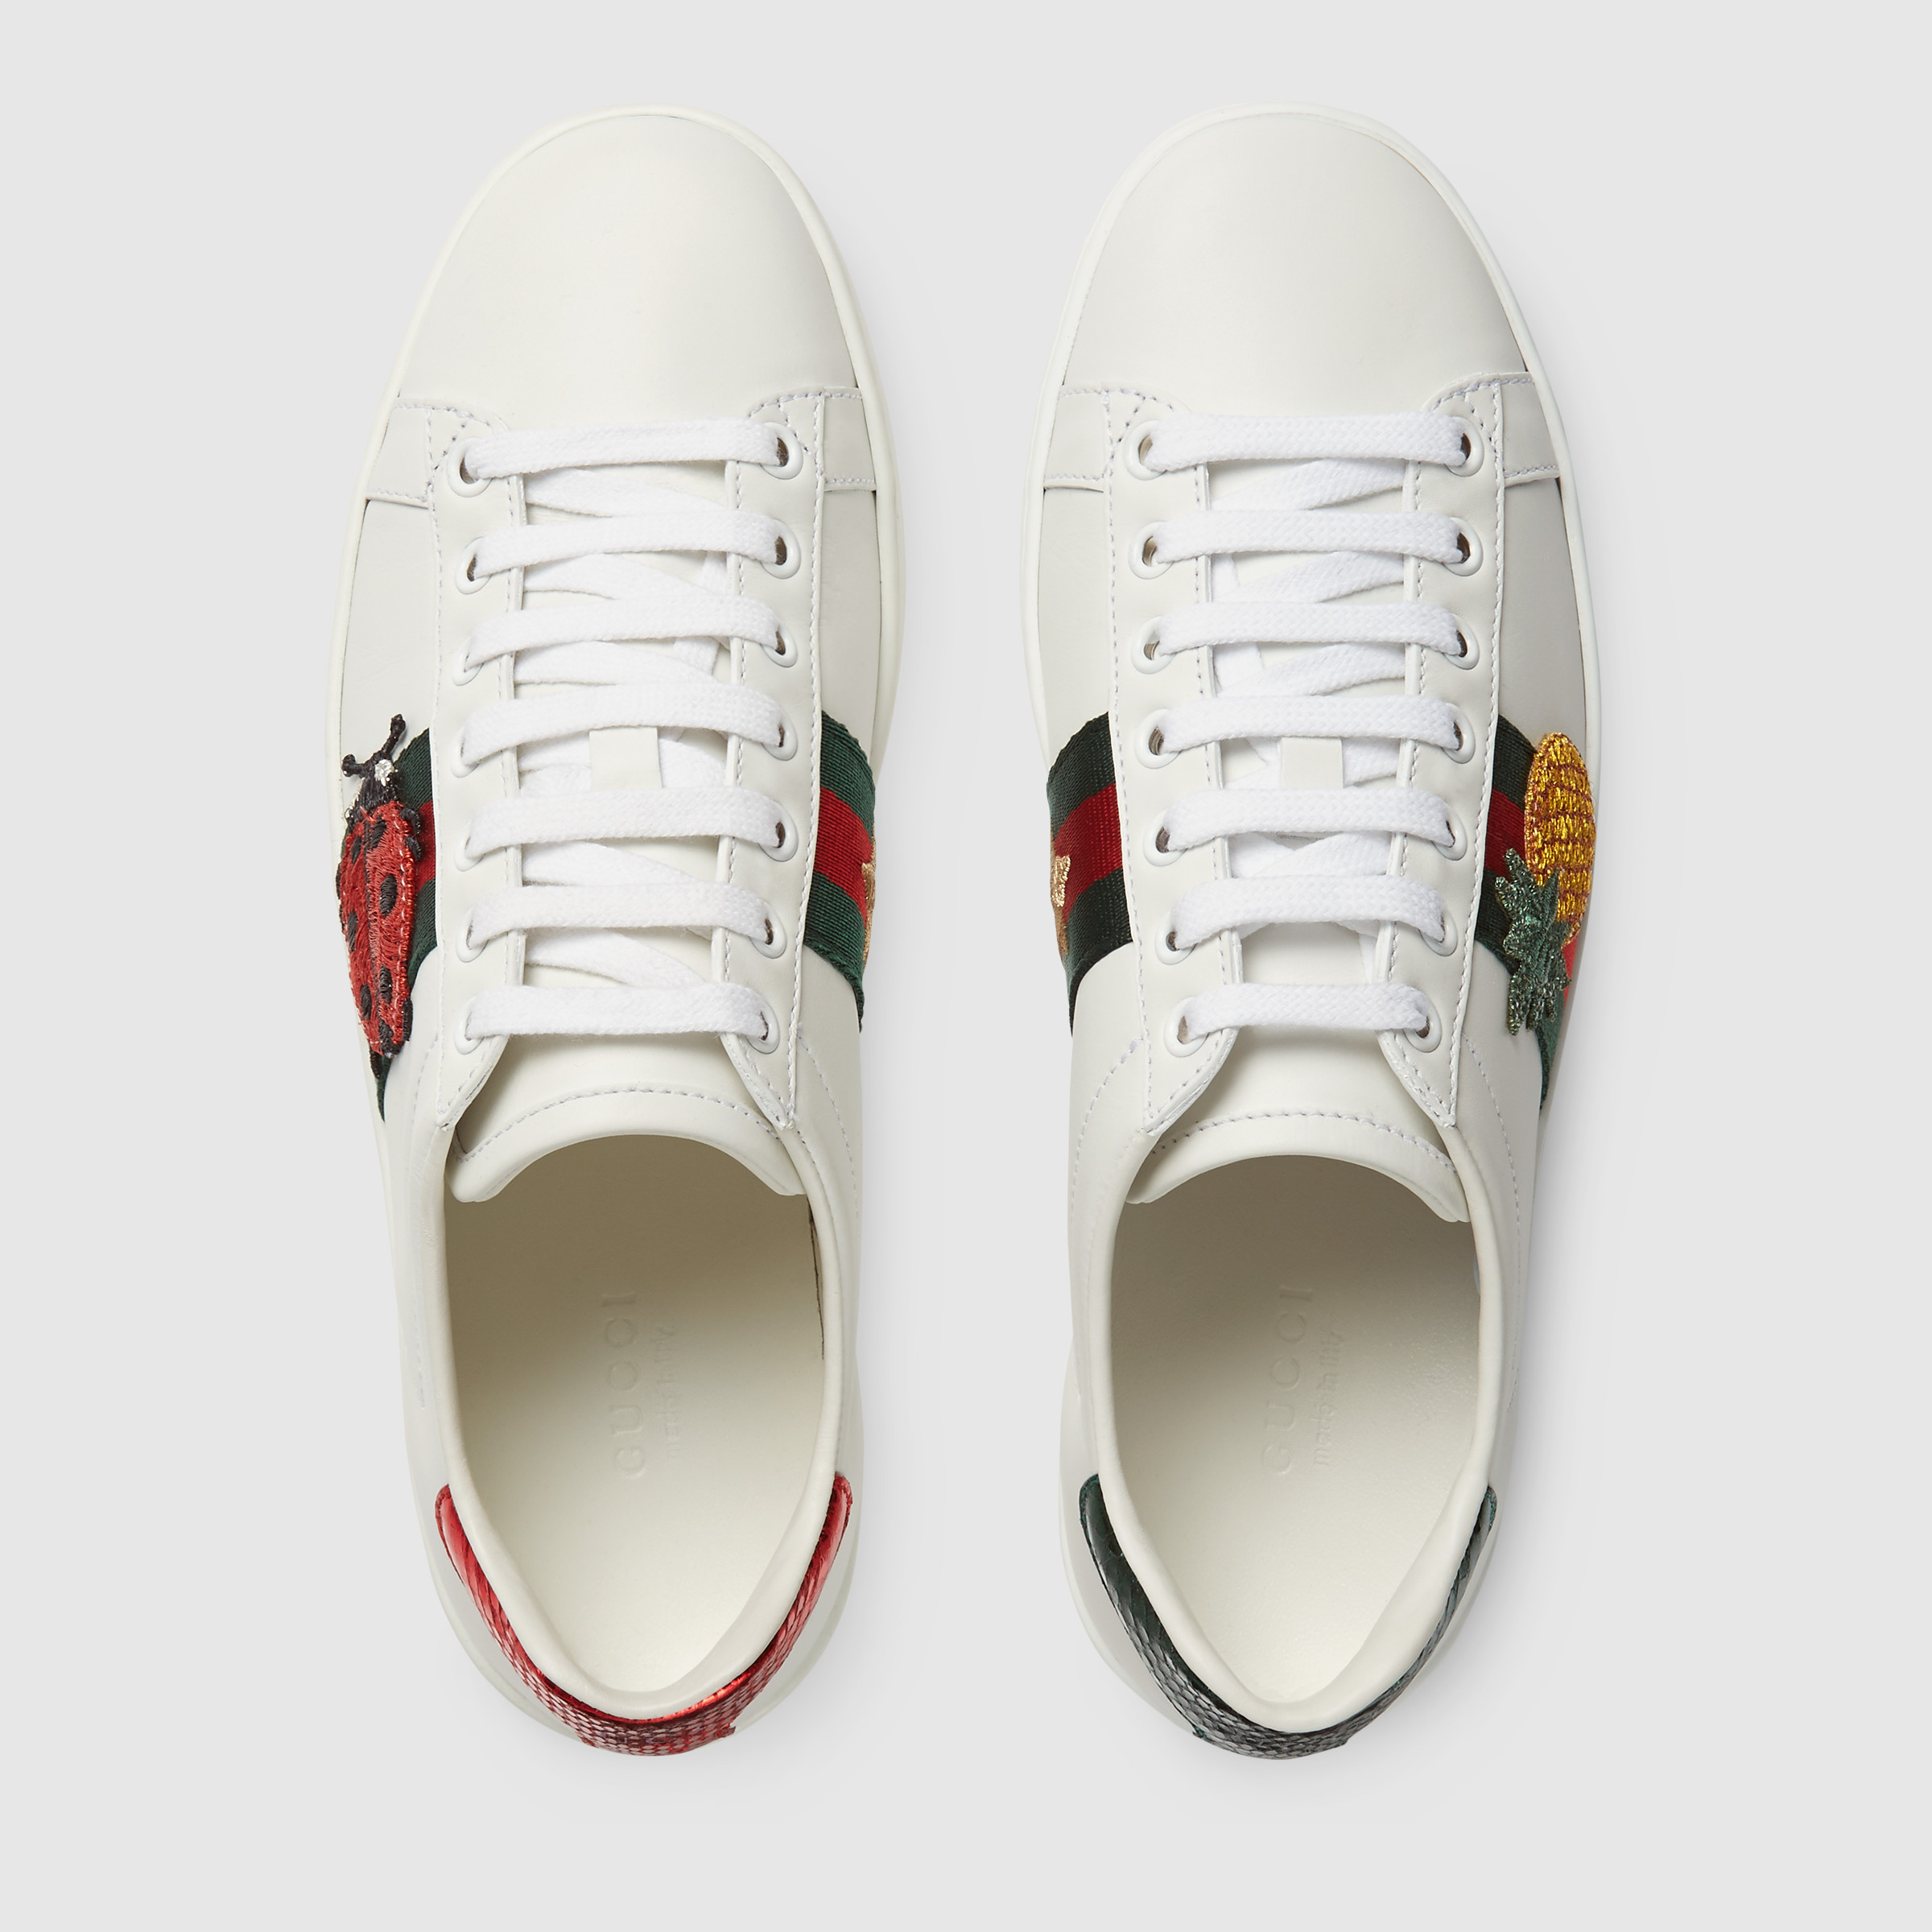 Ace embroidered sneaker_Pineapple _04